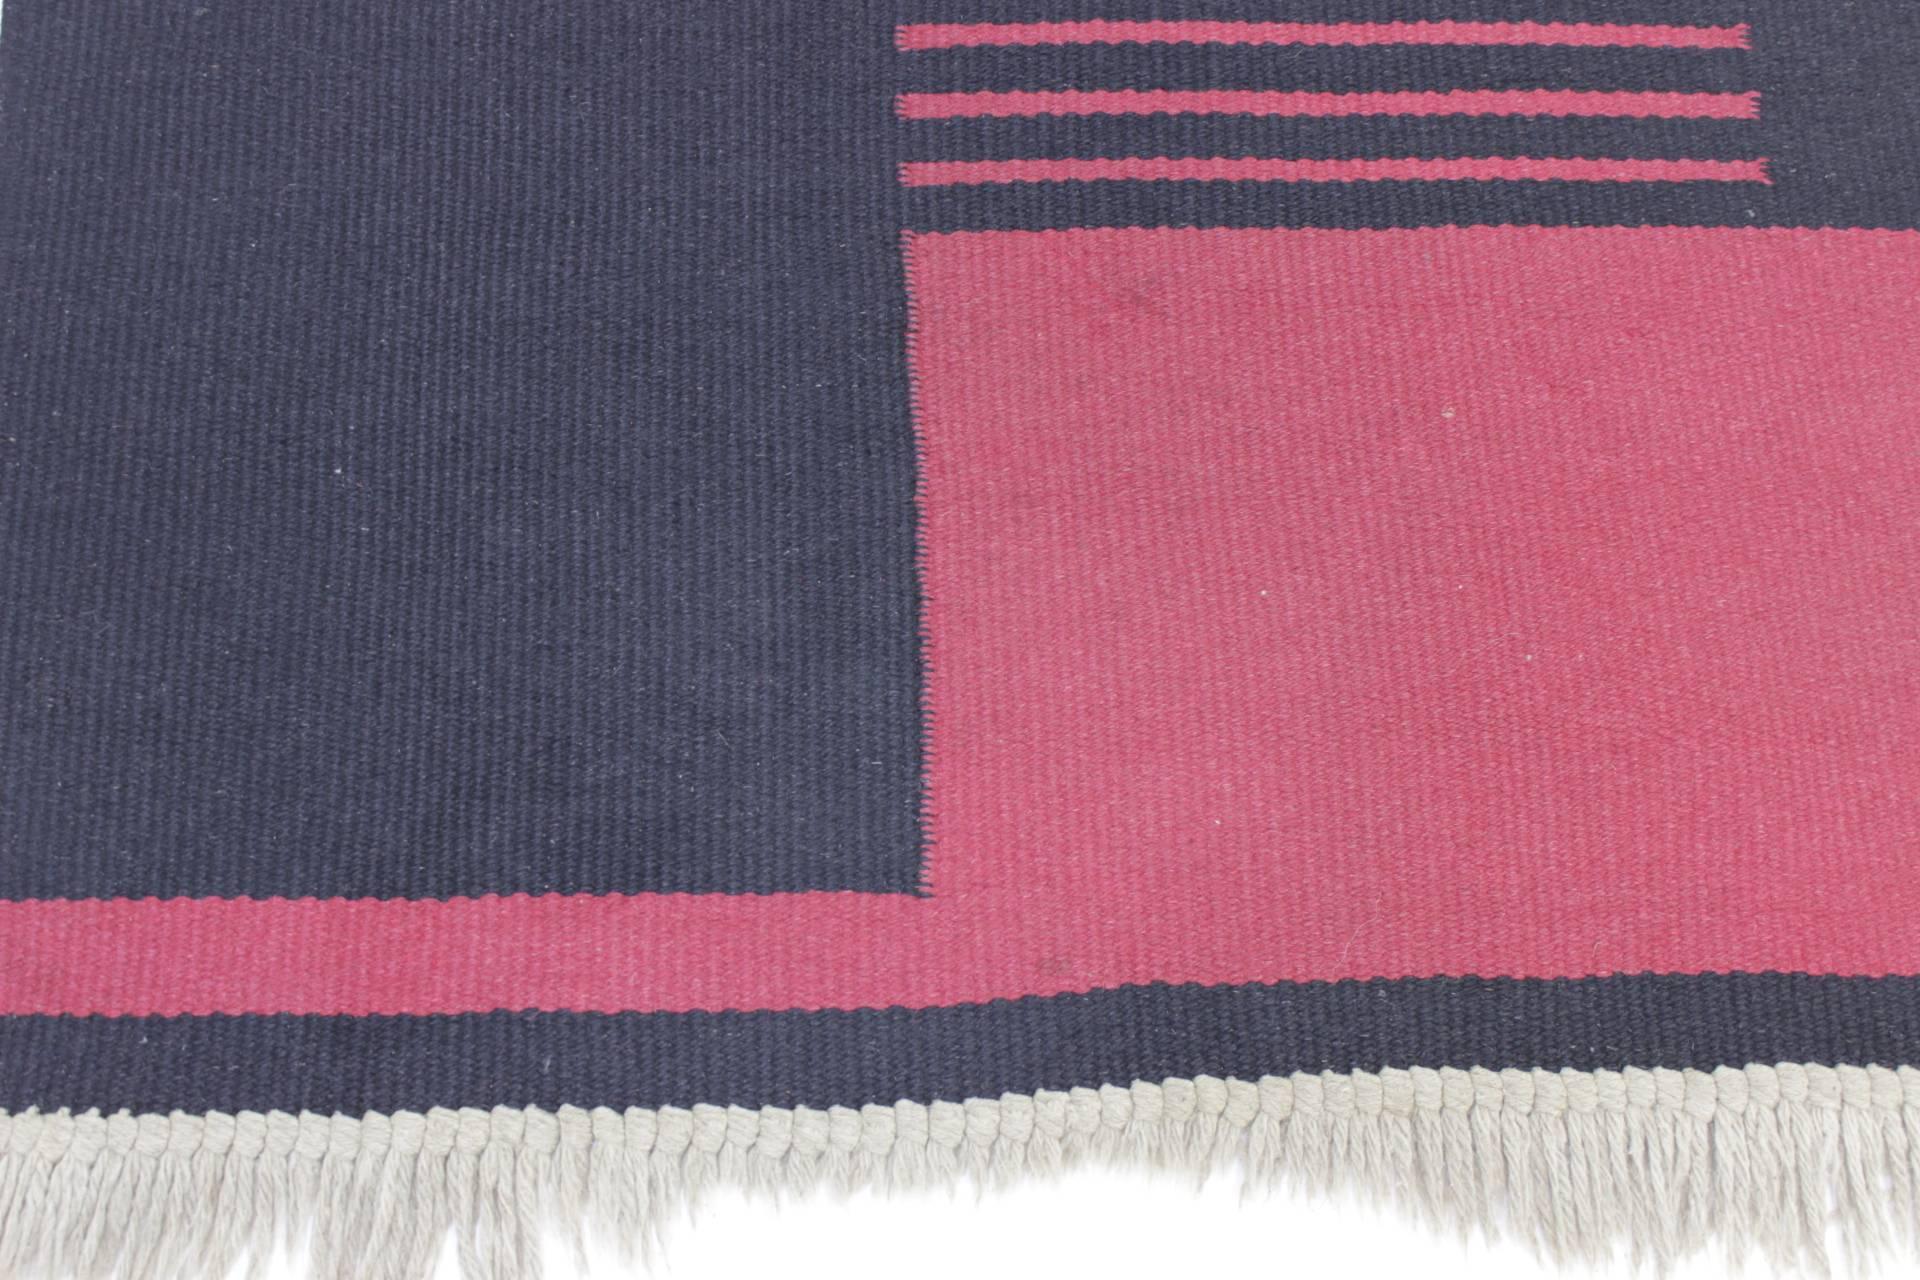 - Czechoslovakia
- Black and dark pink geometric pattern
- Double-sided
- Will be Professionally cleansed
- Fringes partly shorter.